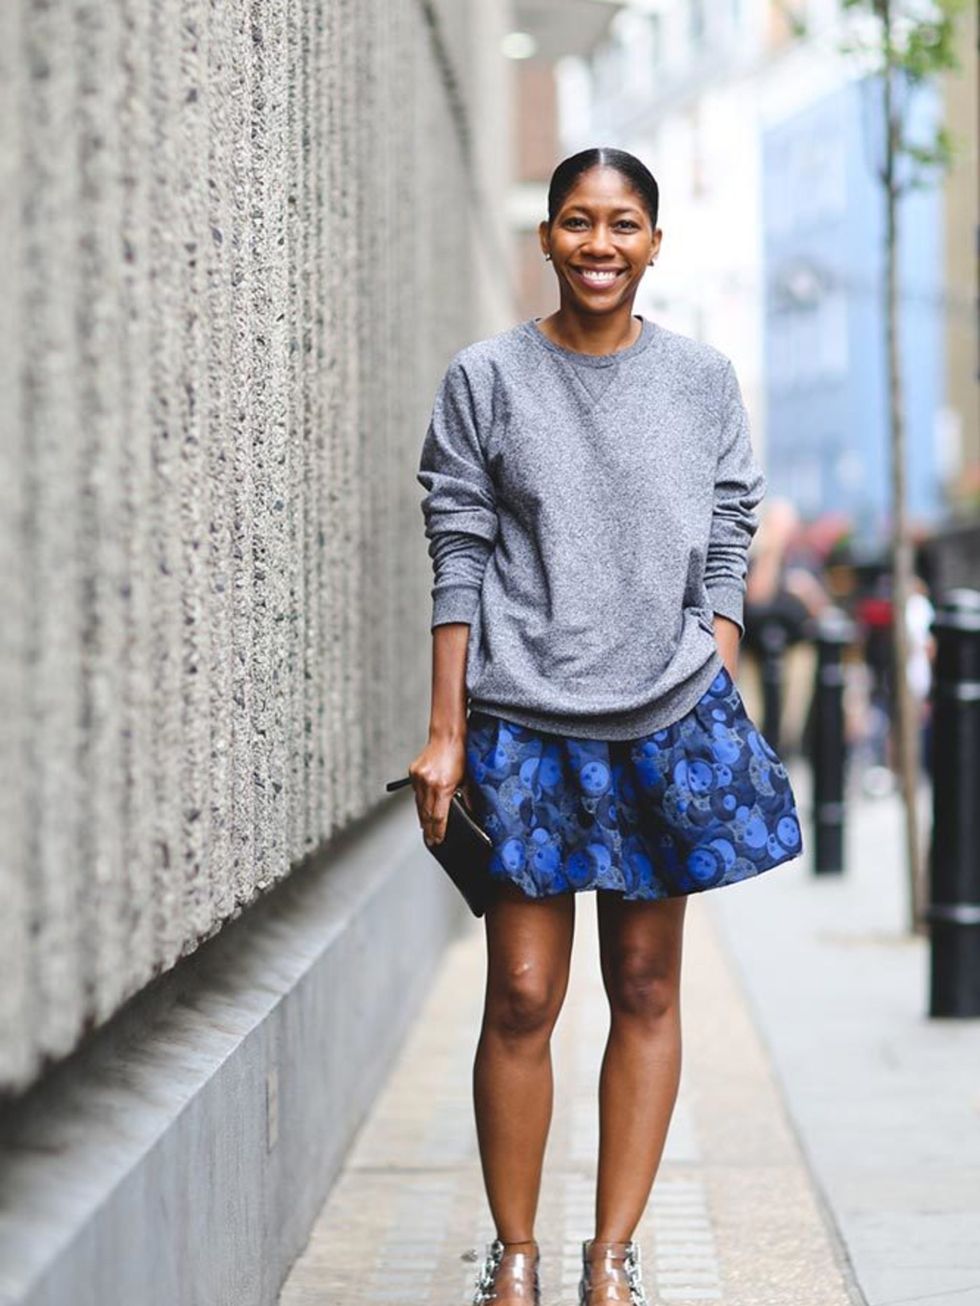 <p>Kenya Hunt, Acting Content Director</p>

<p>Weekday shirt, Catherine Holstein skirt, Toga shoes</p>